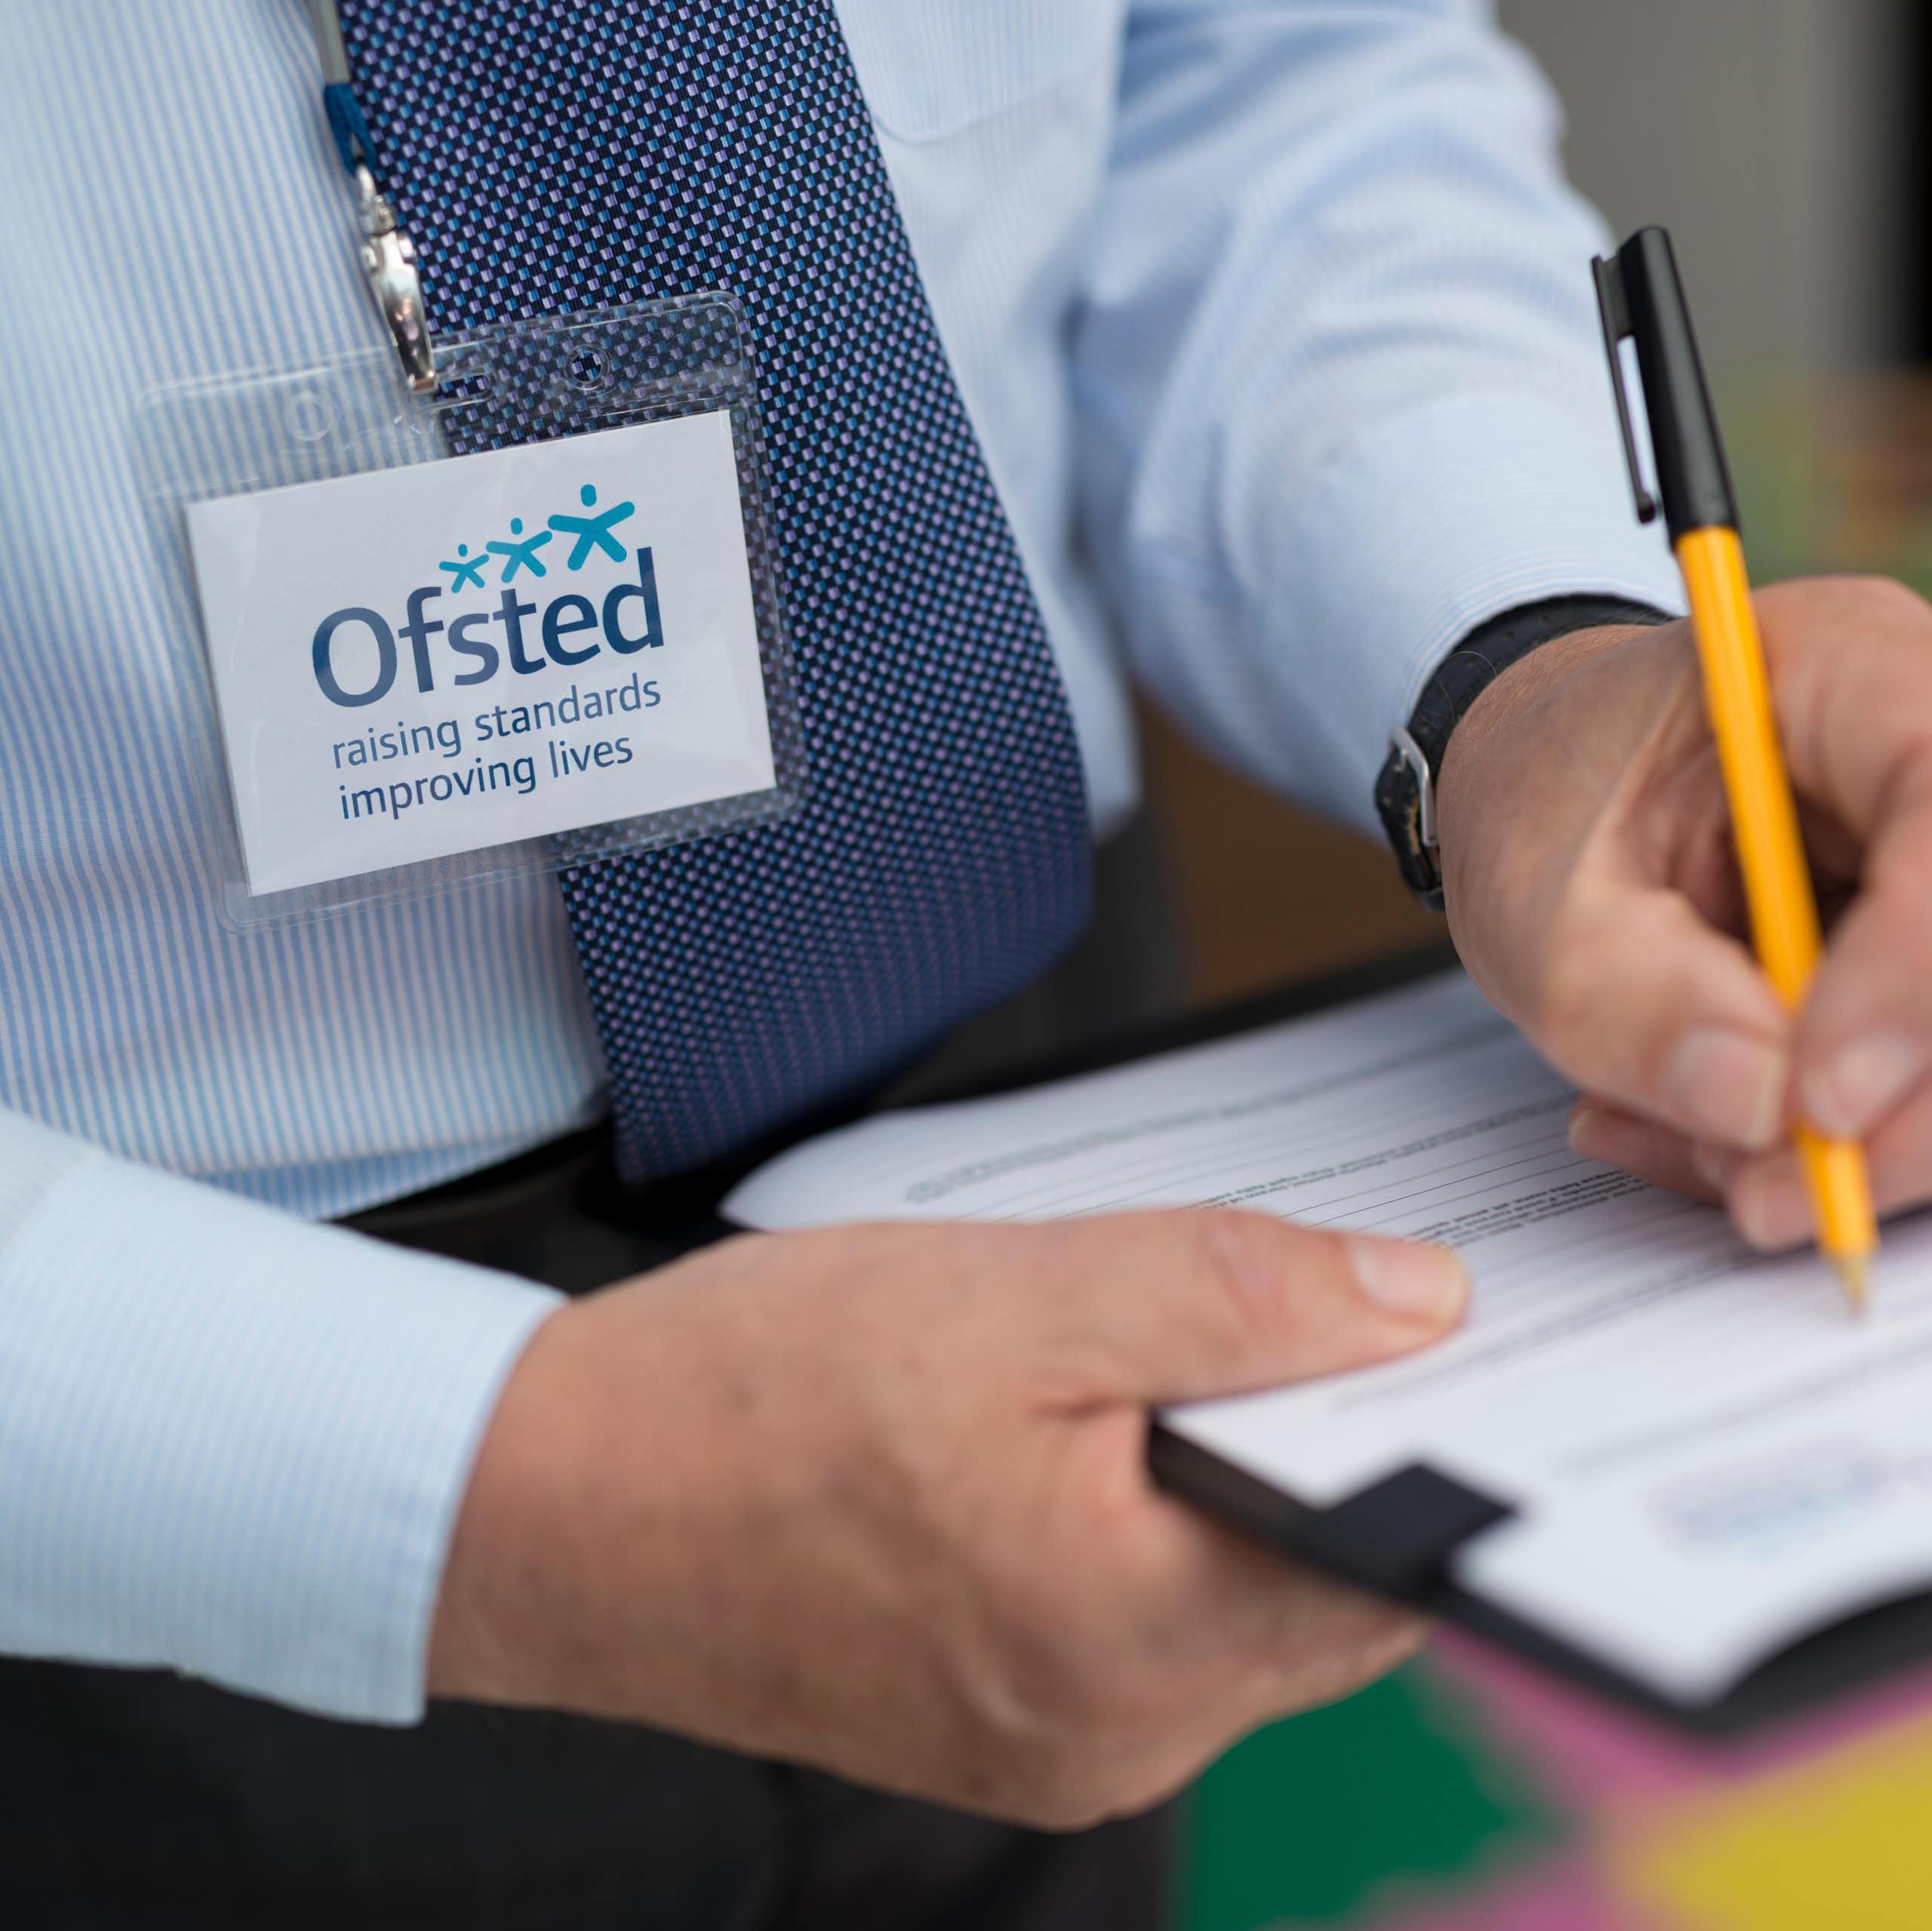 Man with Ofsted lanyard writing on clipboard